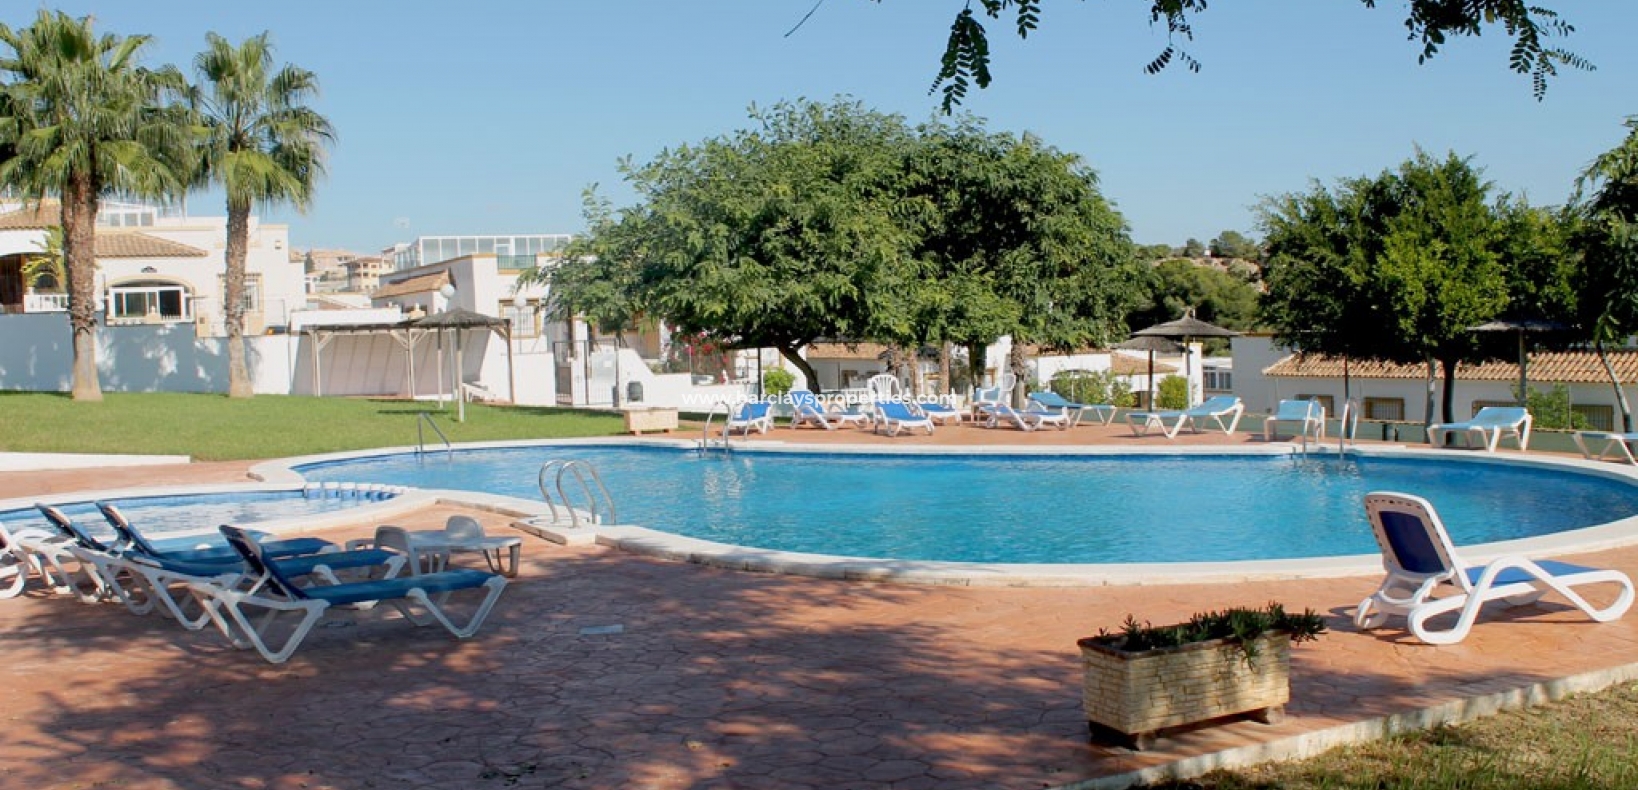 Swimming Pool - South Facing Property for Sale in La Marina Spain